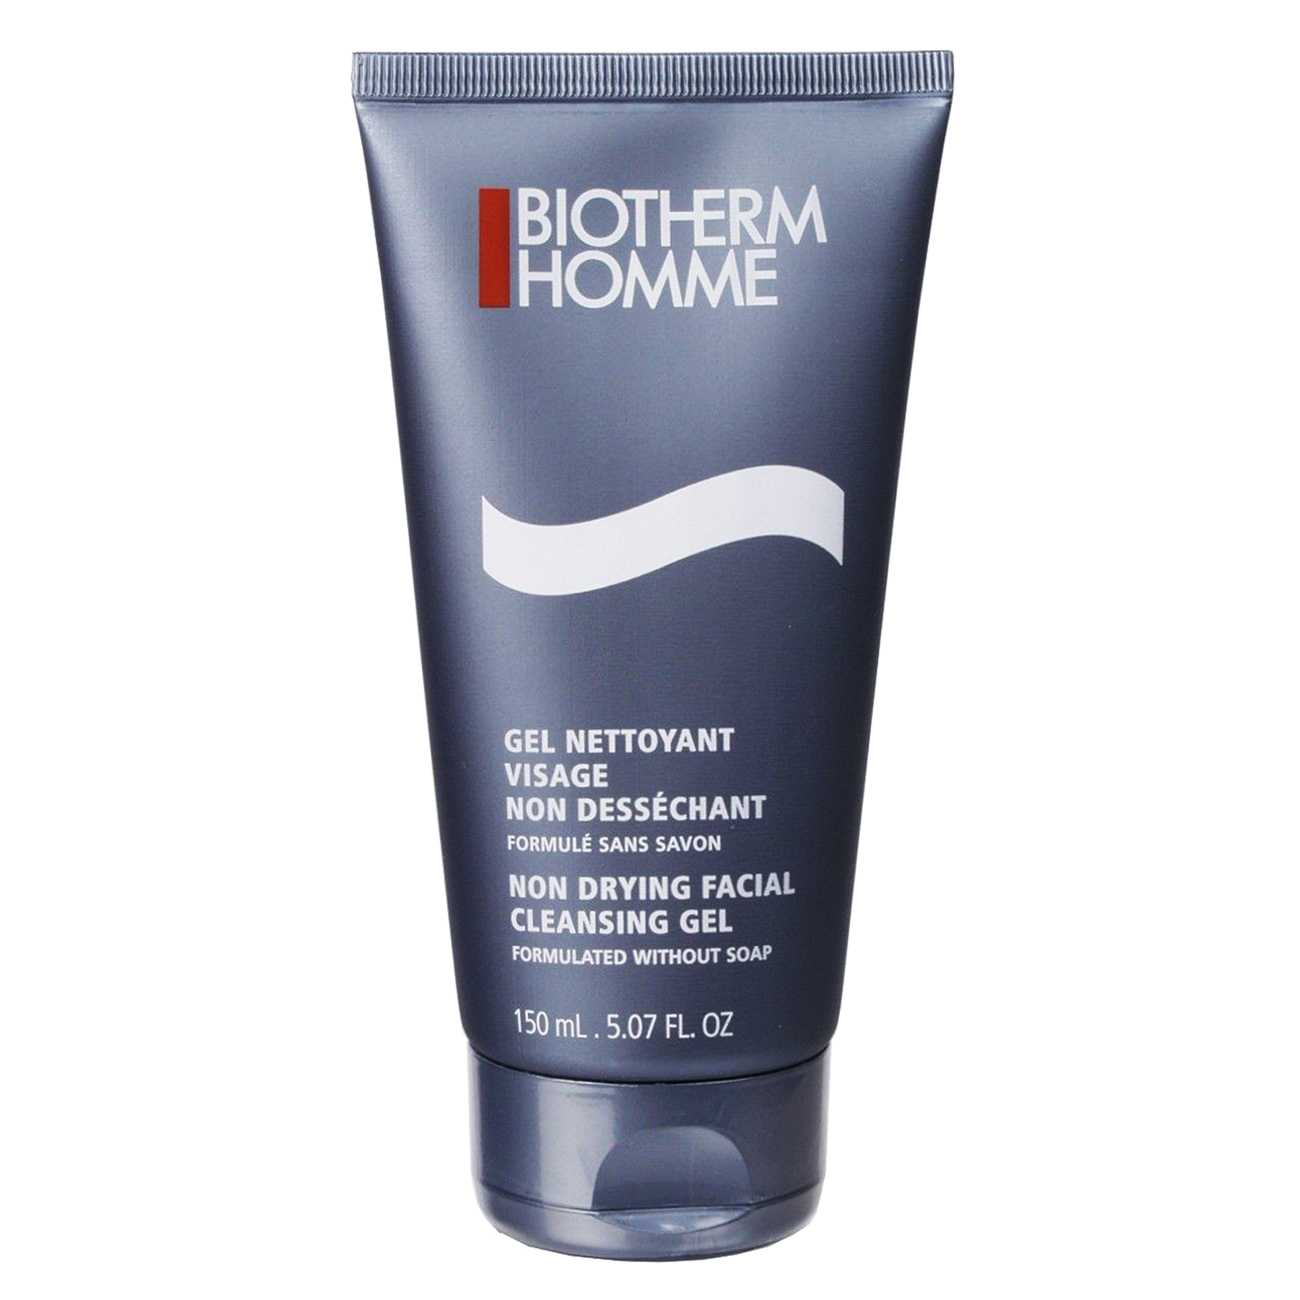 HOMME NON DRYING FACIAL CLEANSING GEL 150 ML Biotherm bestvalue.eu